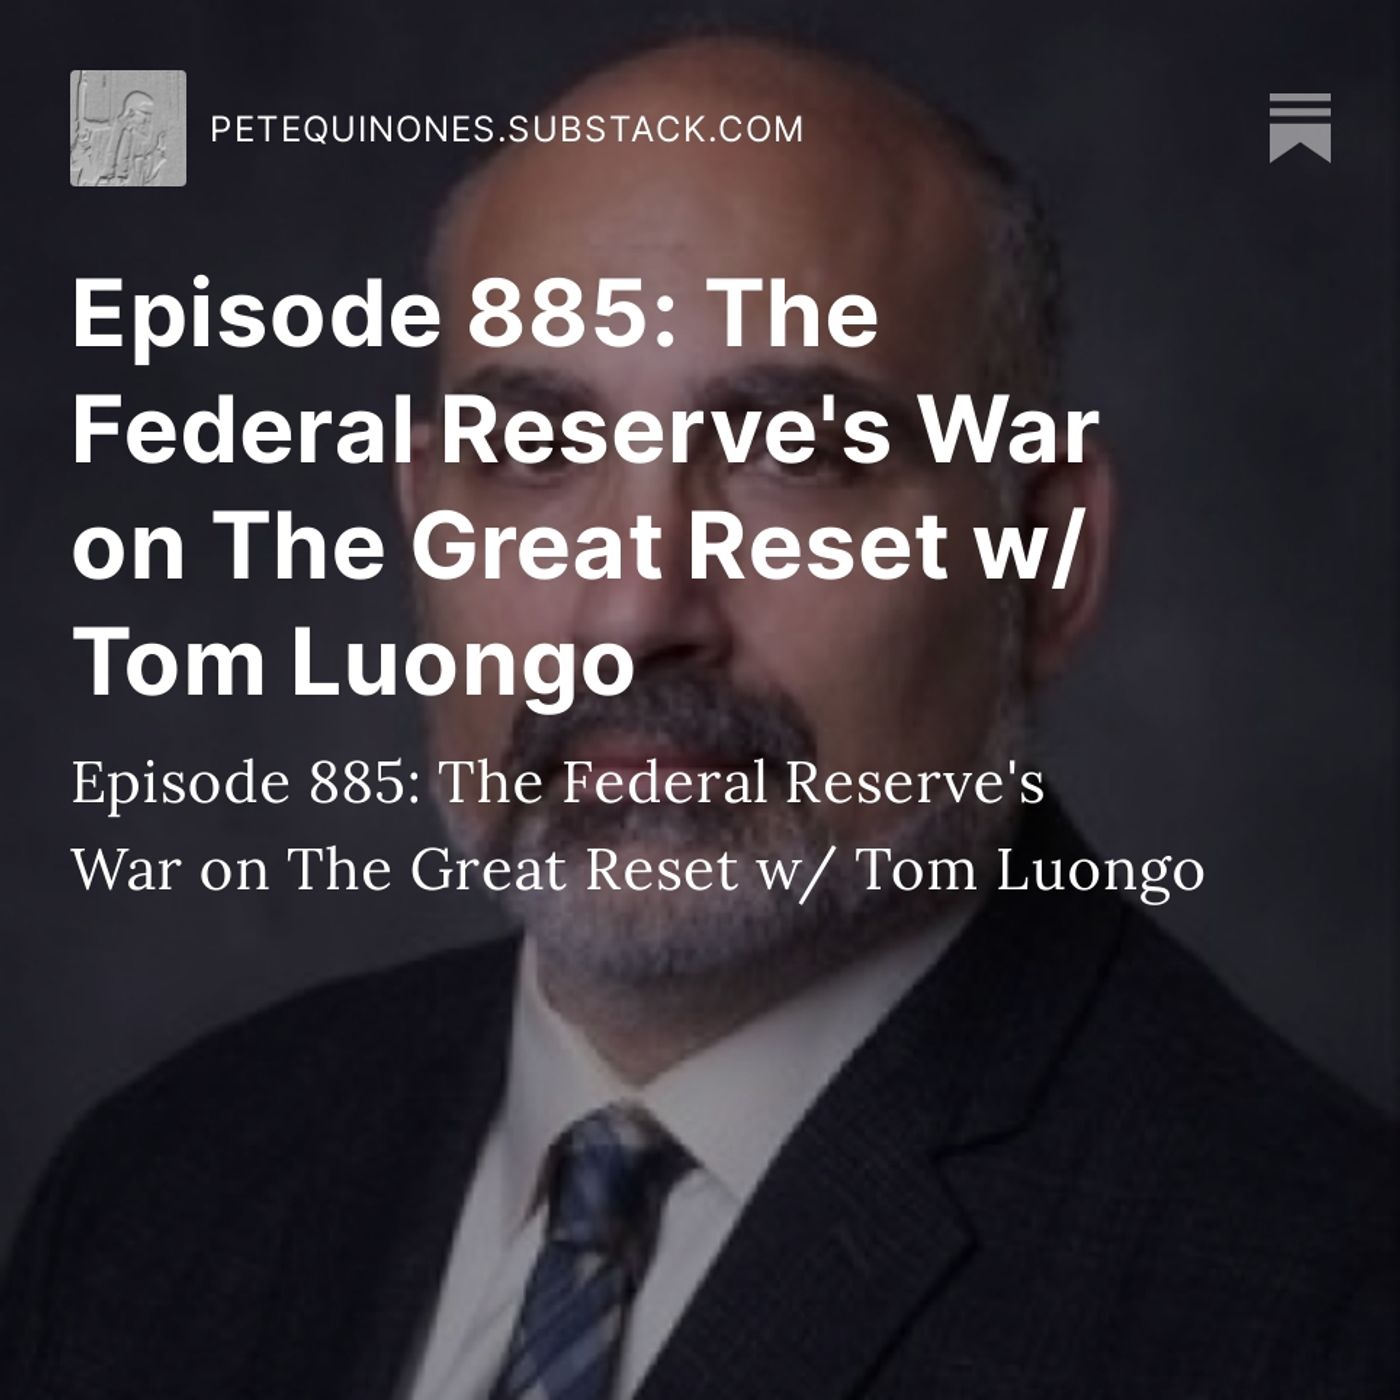 Episode 885: The Federal Reserve's War on The Great Reset w/ Tom Luongo